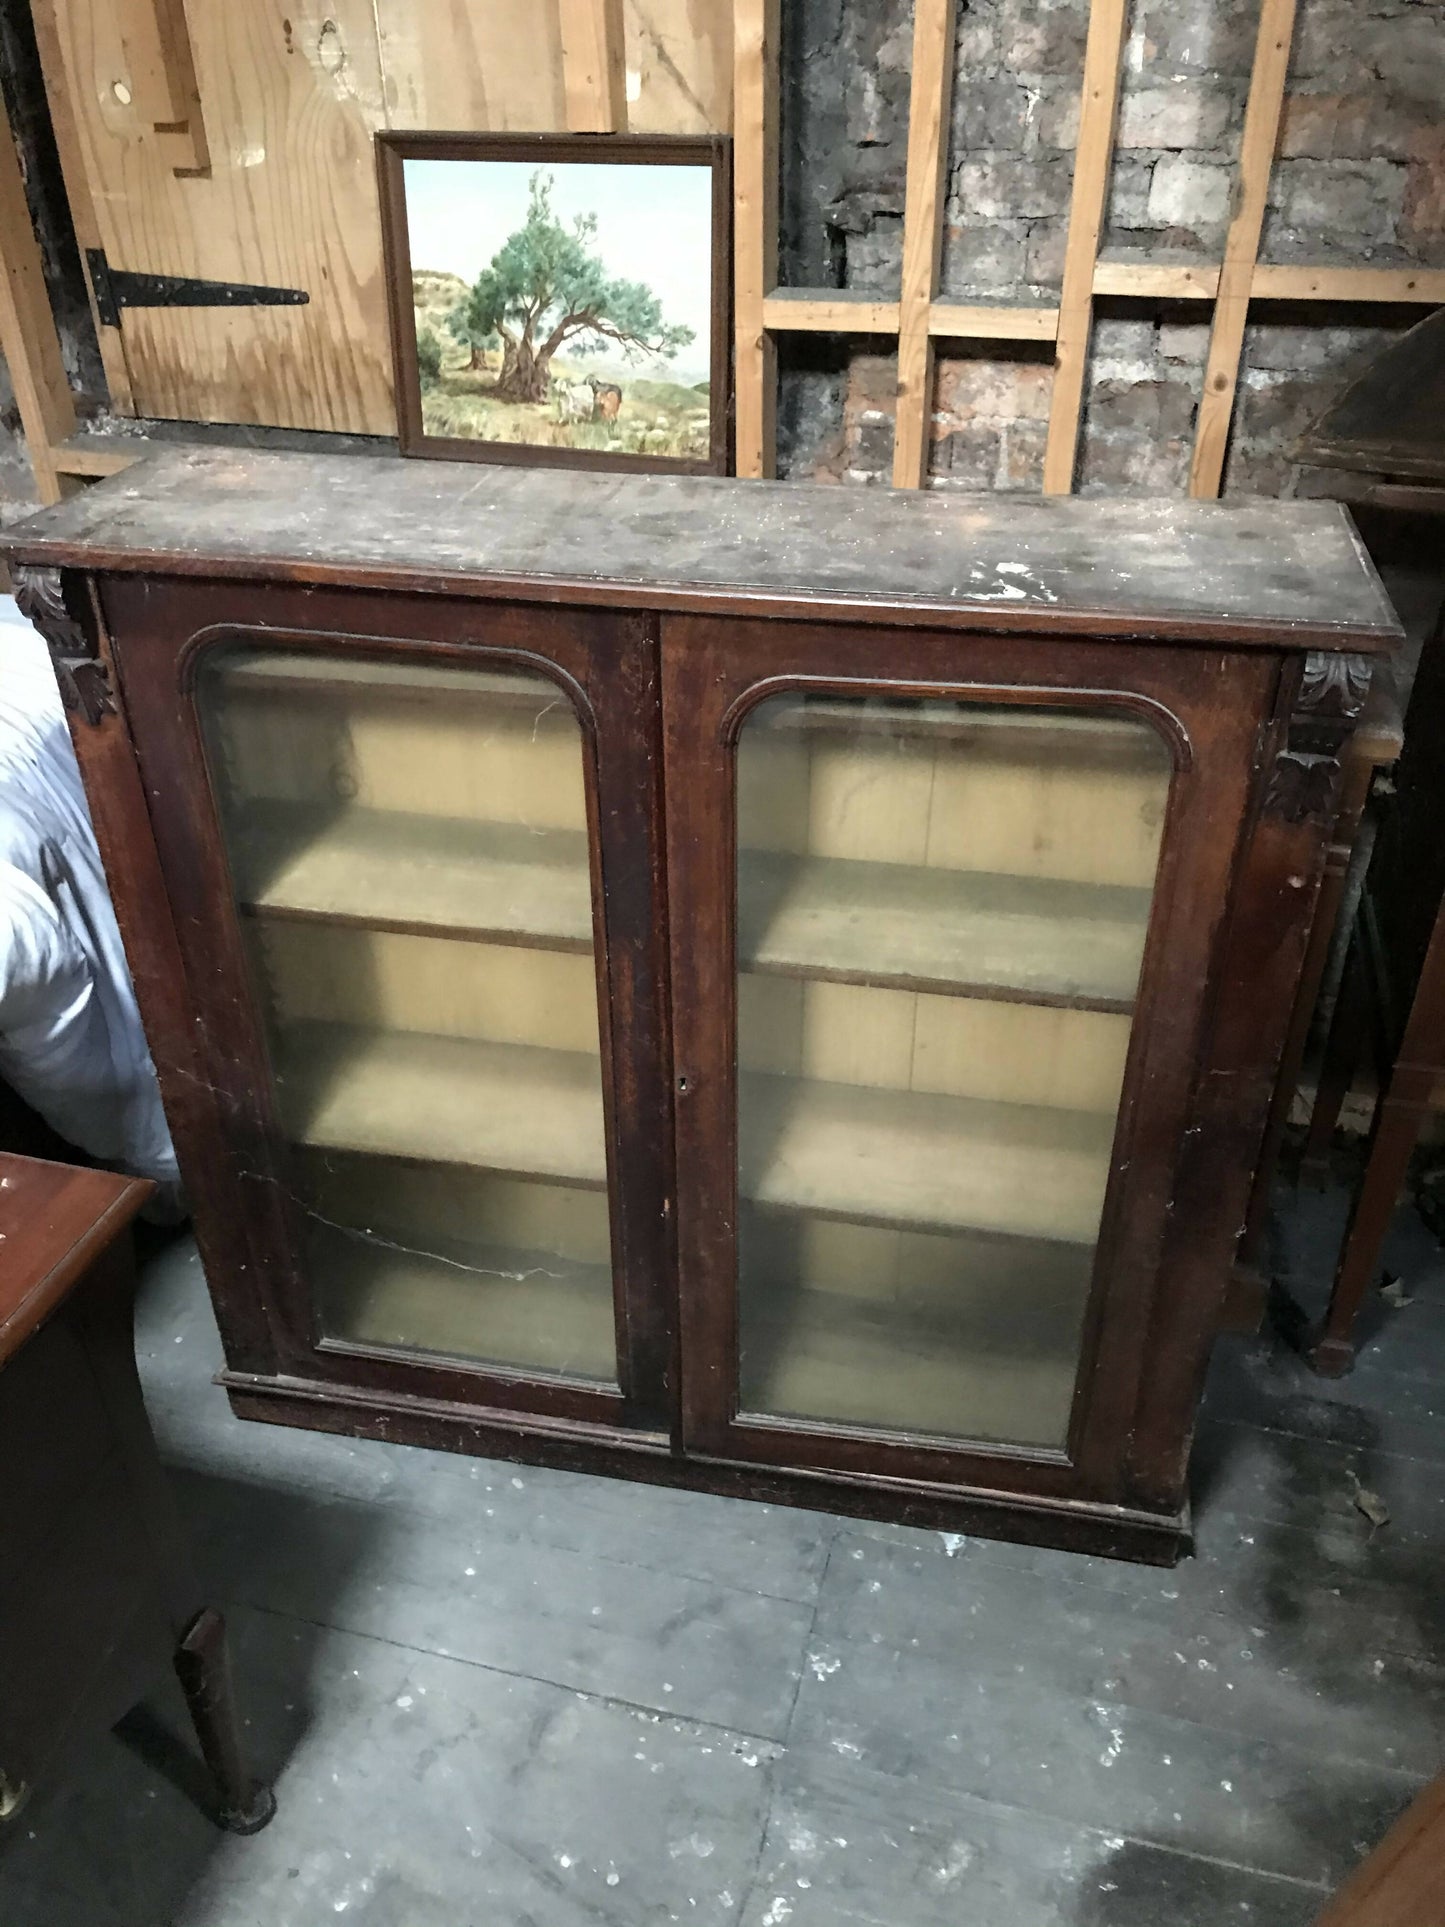 Gothic Wooden Display Cabinet